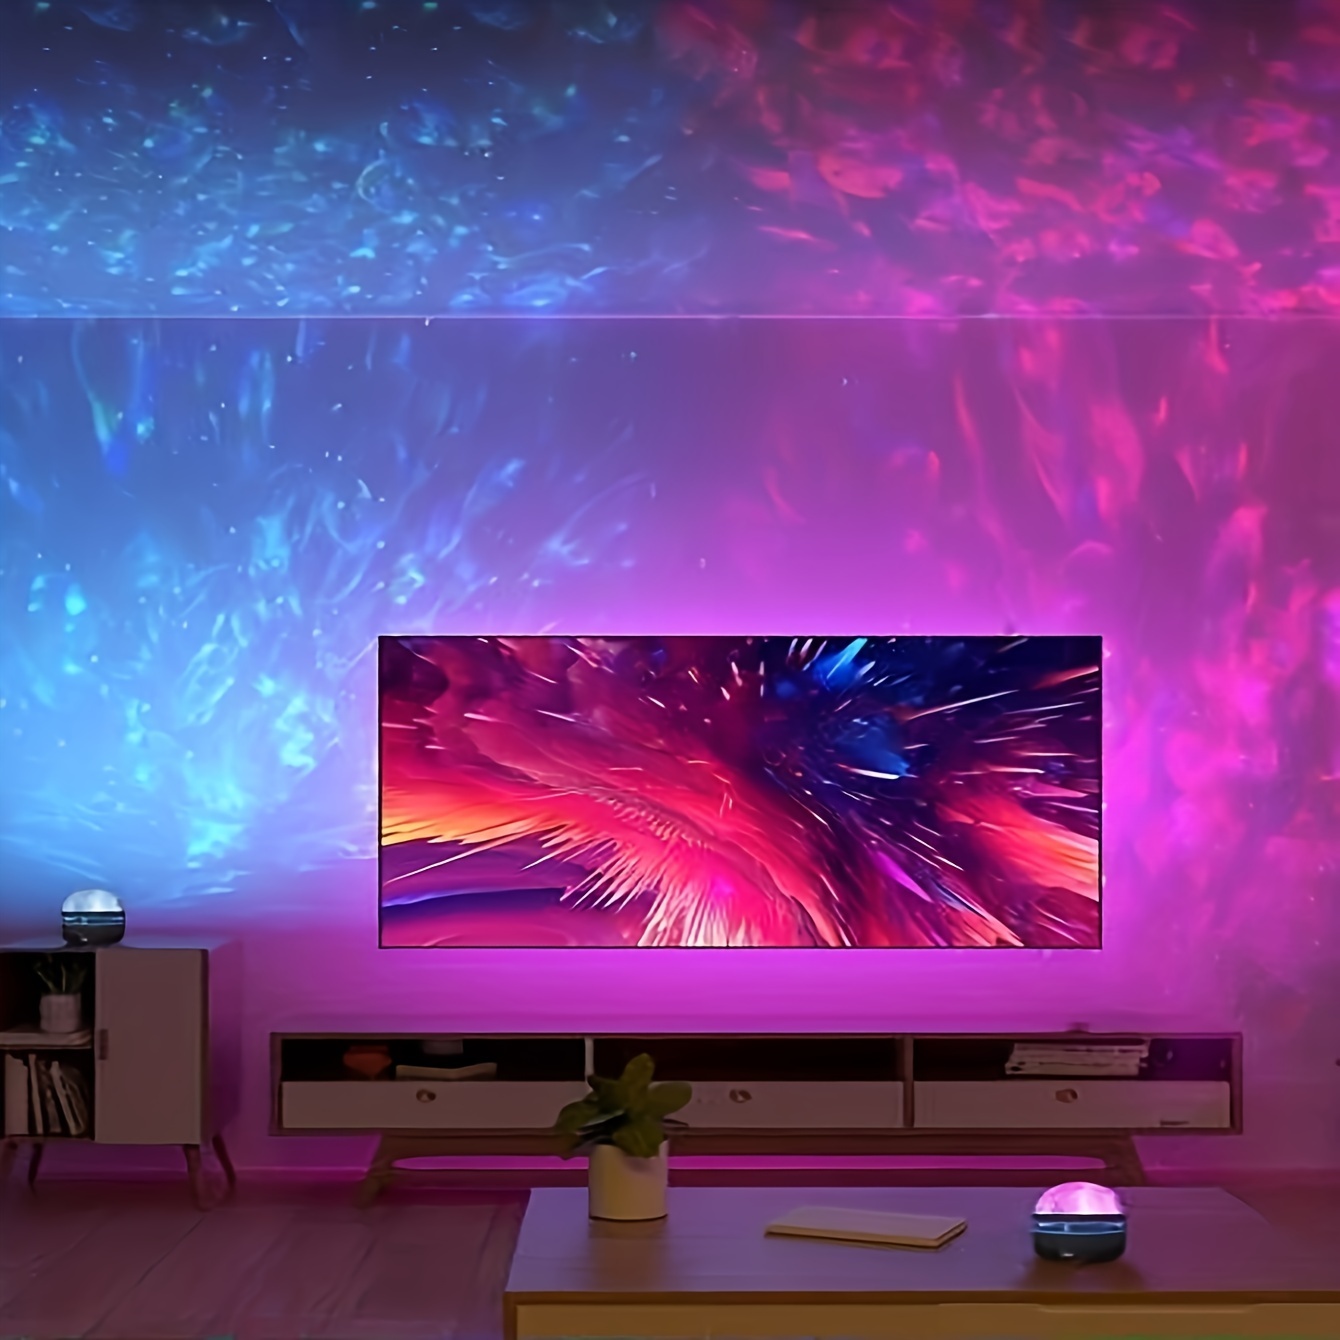 Nebula Cloud Galaxy Projector with Ocean Wave Music – Stuffible